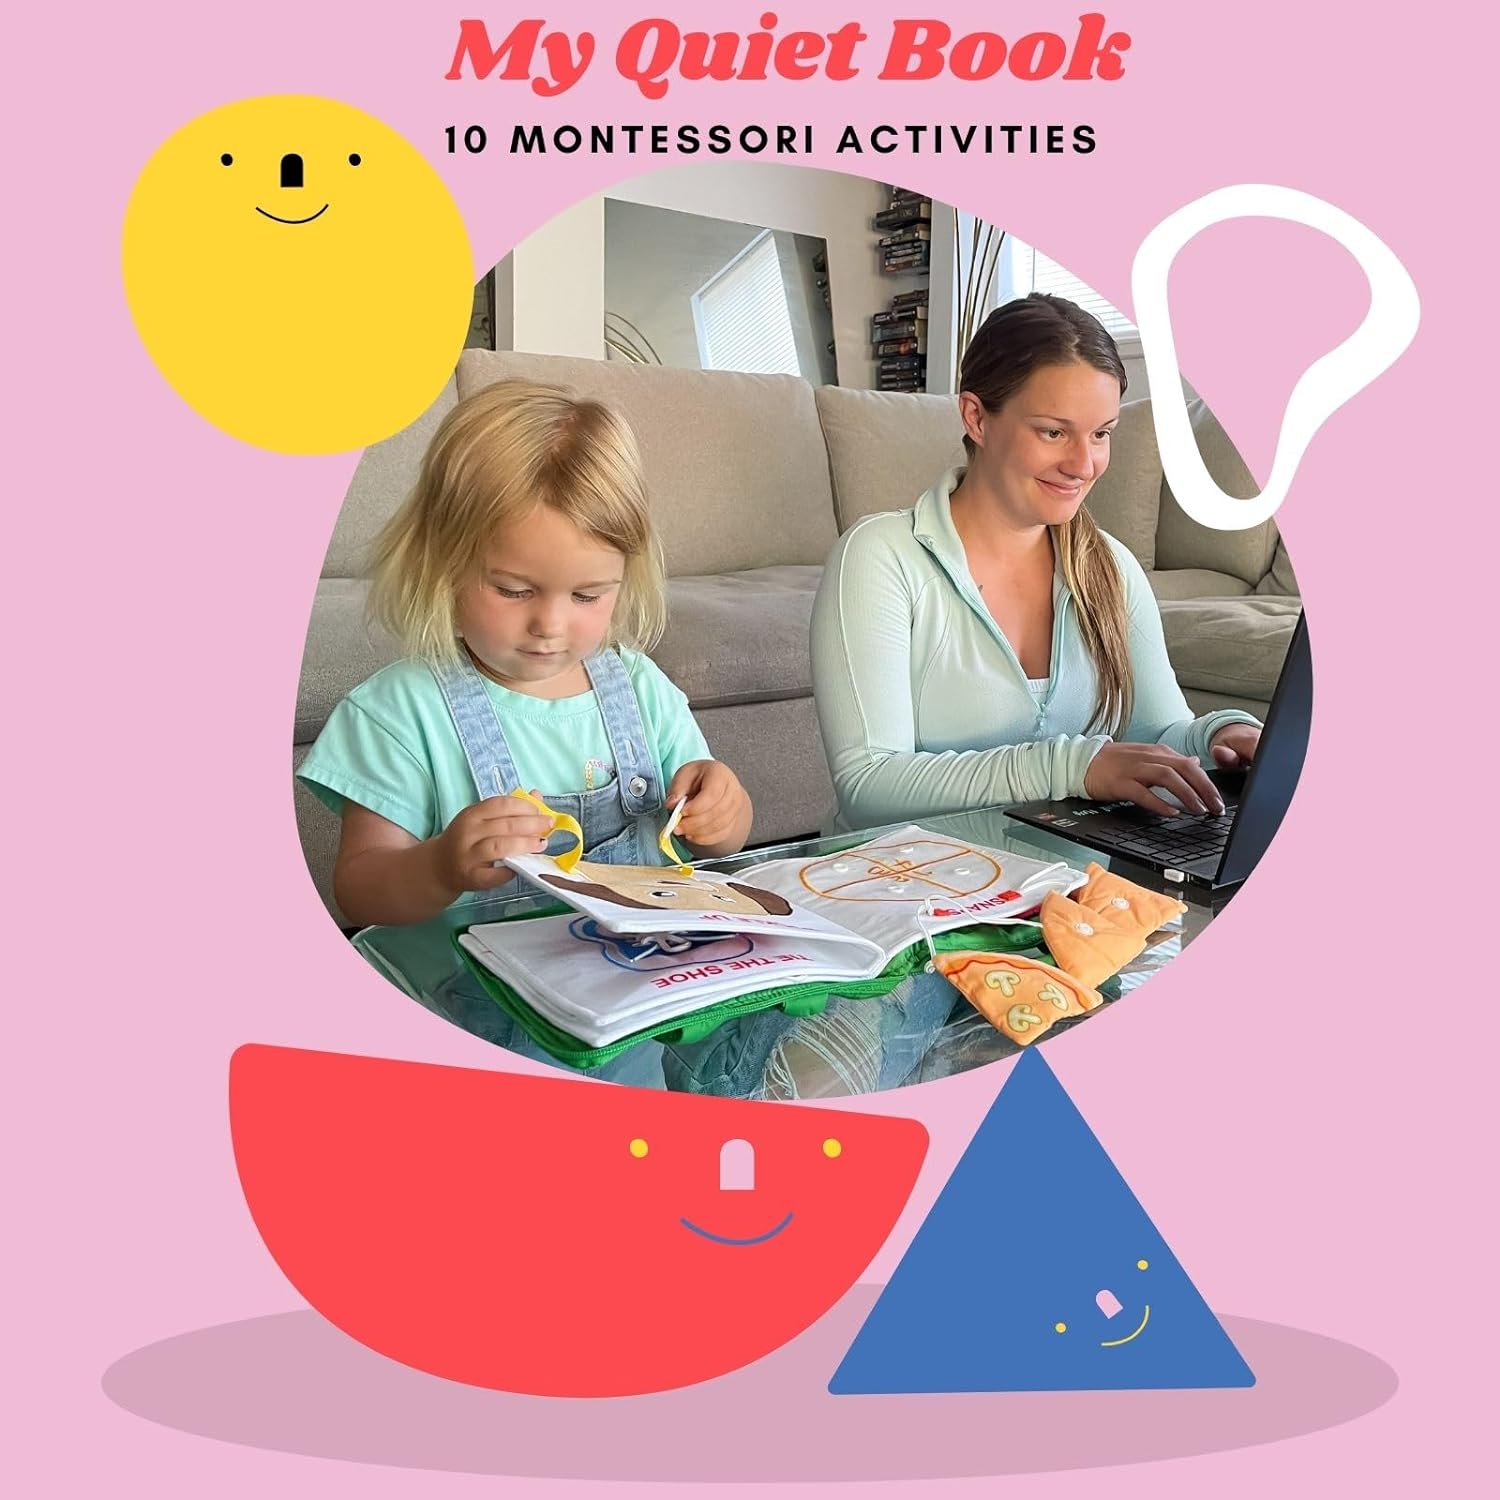 My Quiet Book - Airplane Must Haves for Toddlers, Busy Board for Toddlers 1-3, Montessori Busy Books for Toddlers 1 2 3 4 Year Old with 10 Toddler Learning Activities, Gift for 2 Year Old Girl  Boy